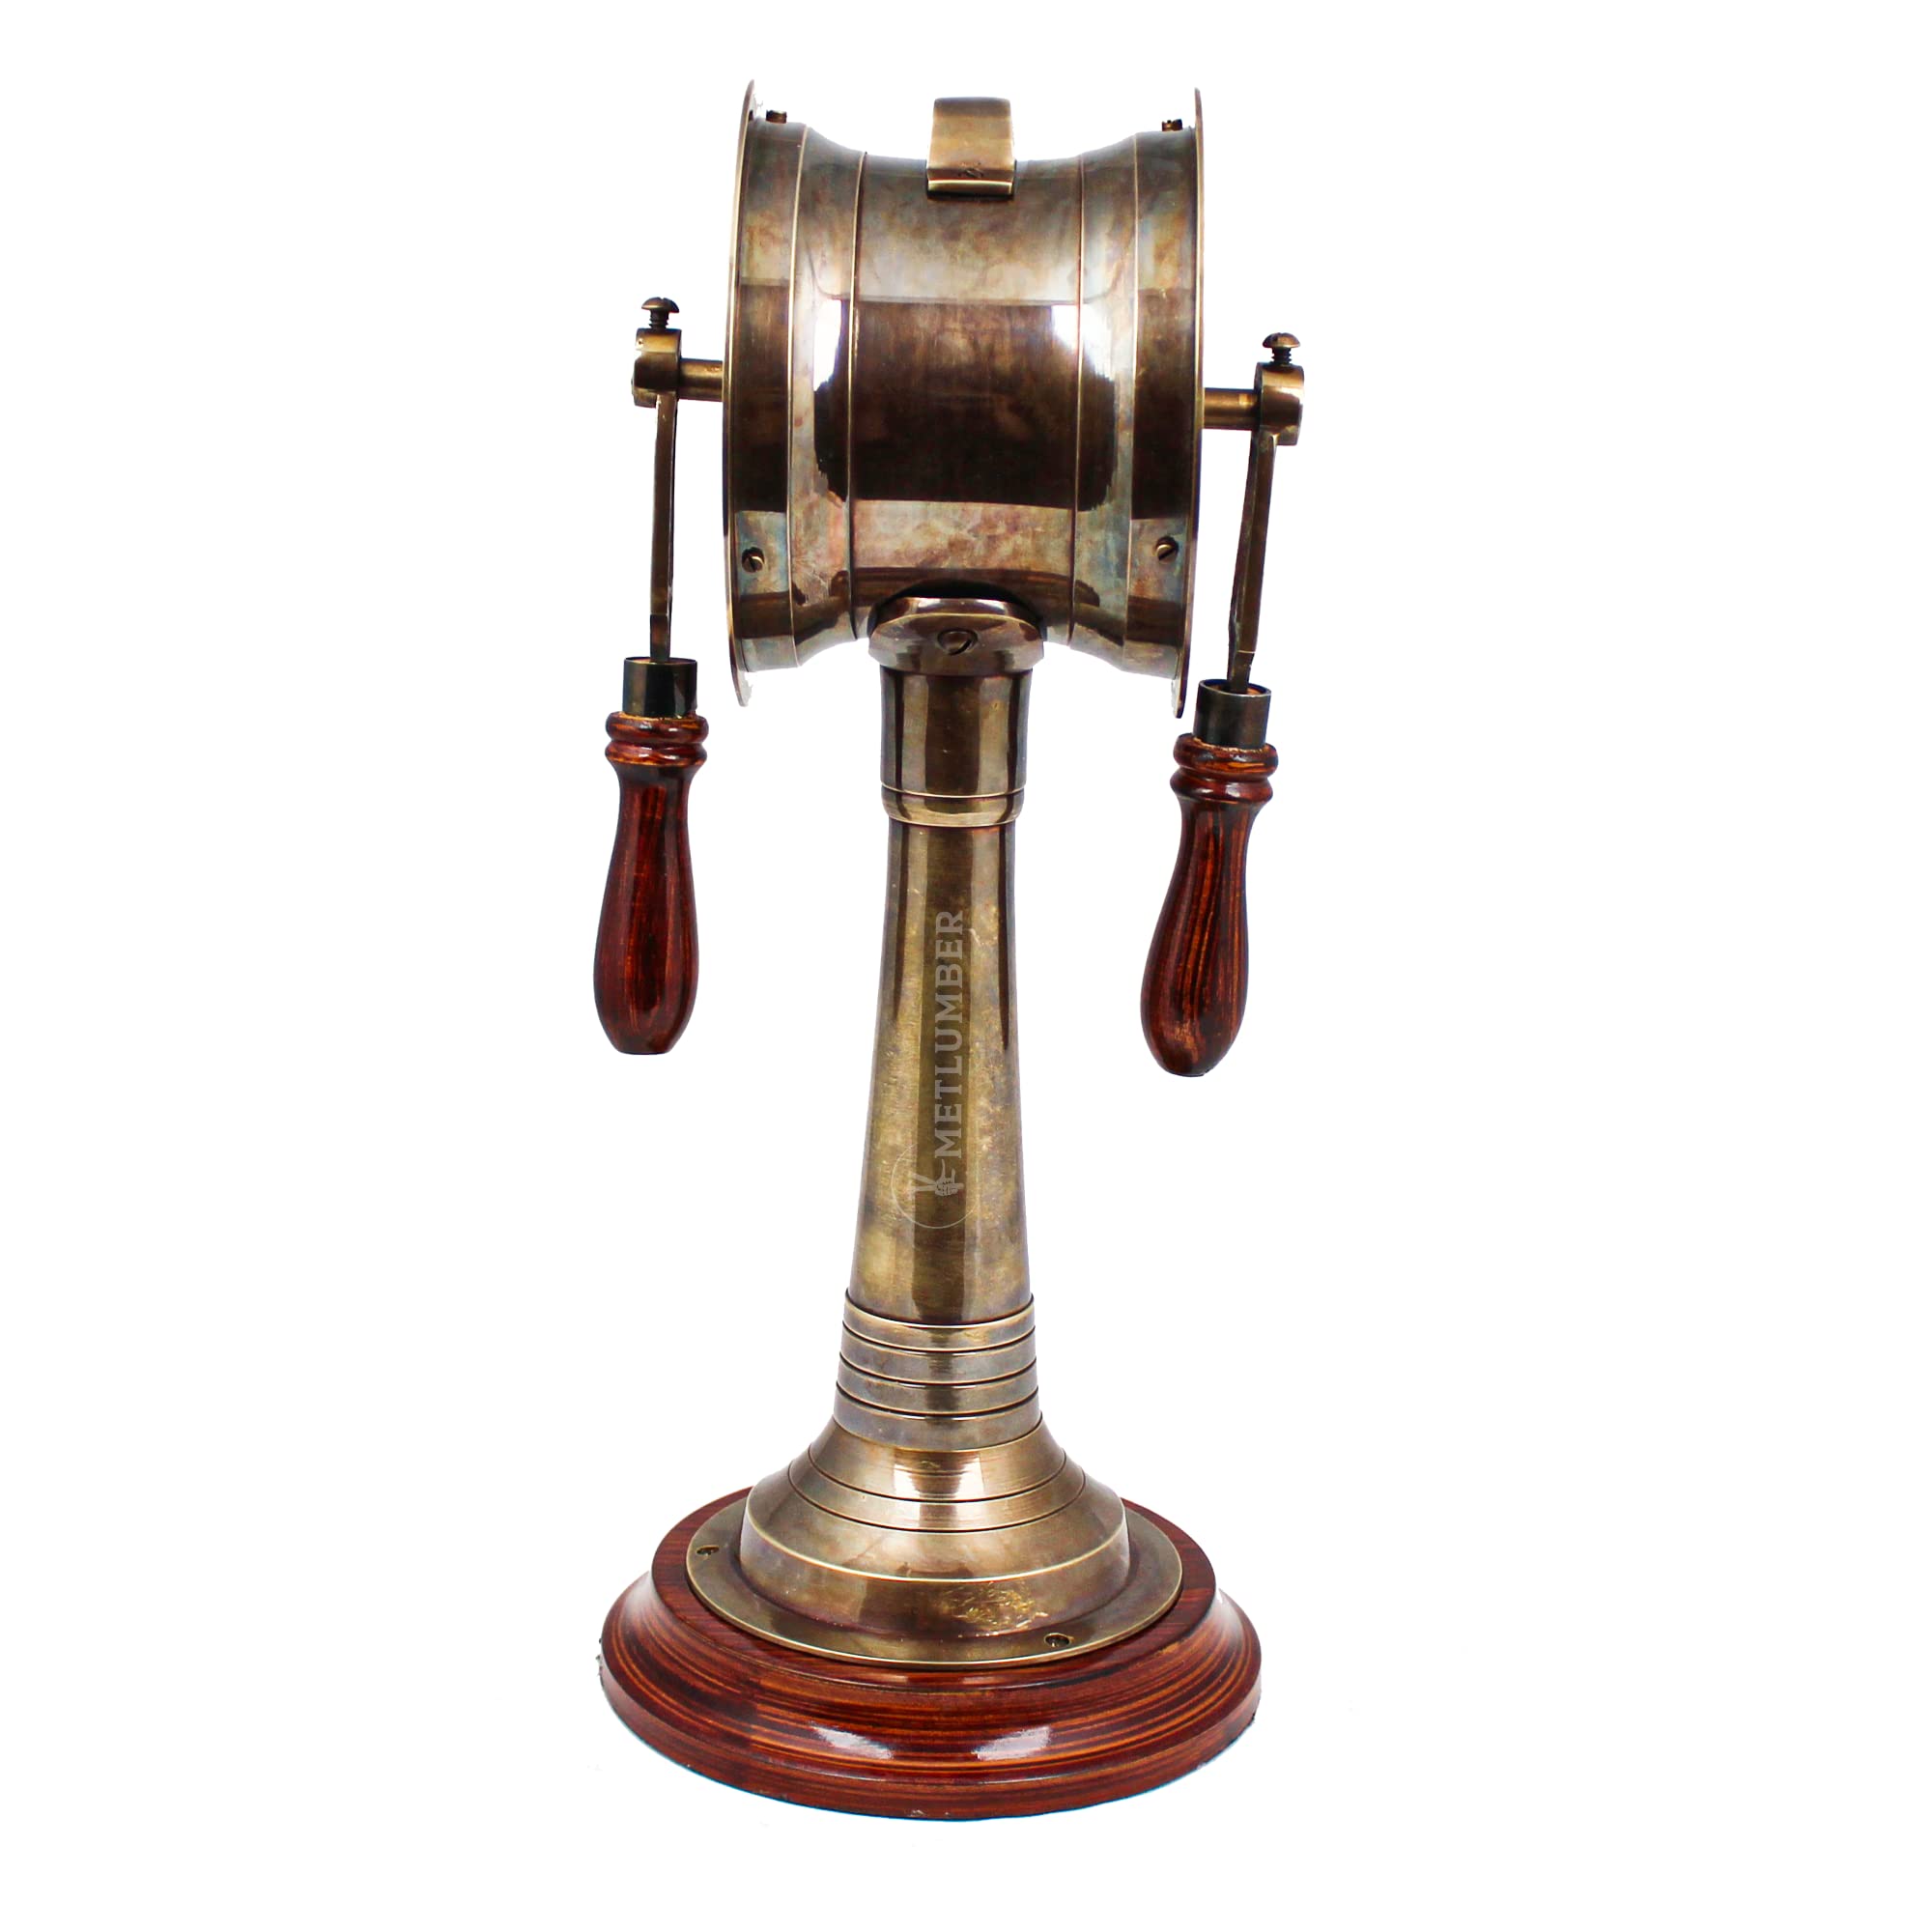 METLUMBER Vintage Nautical Brass Engine Order Telegraph Rustic Ship Engine Room Telegraph with Wooden Base Antique Decorative Maritime Collectible for Home Decor (6 Inches)